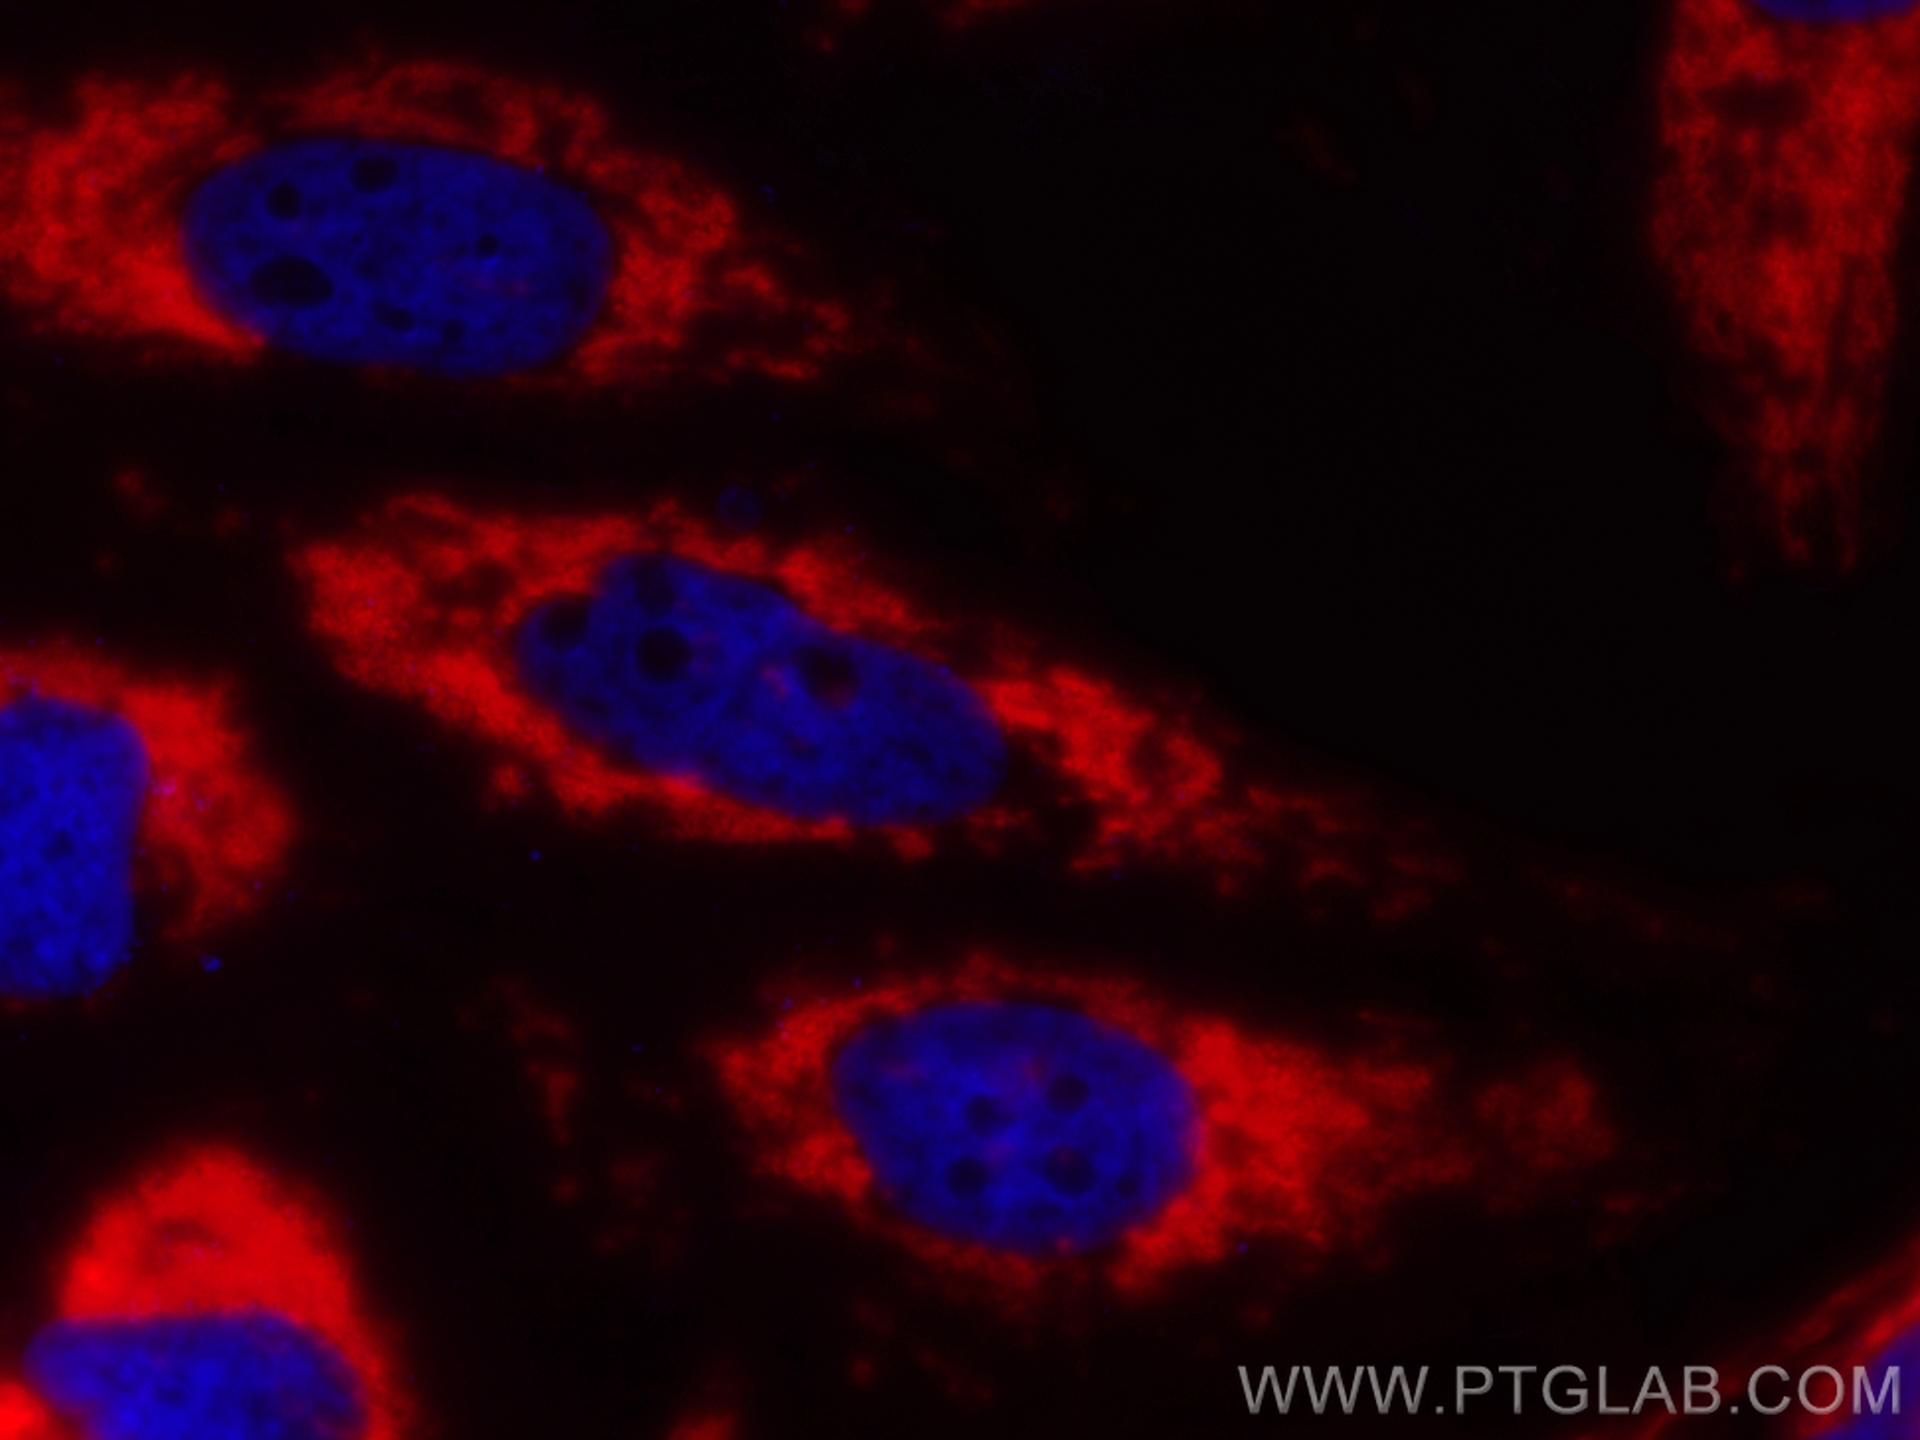 Immunofluorescence of HeLa: PFA-fixed HeLa cells were stained with anti-ATP5O antibody (66696-1-Ig) labeled with FlexAble HRP Antibody Labeling Kit for Mouse IgG1 (KFA025) and Tyramide-594 (red).  Cell nuclei are in blue. 